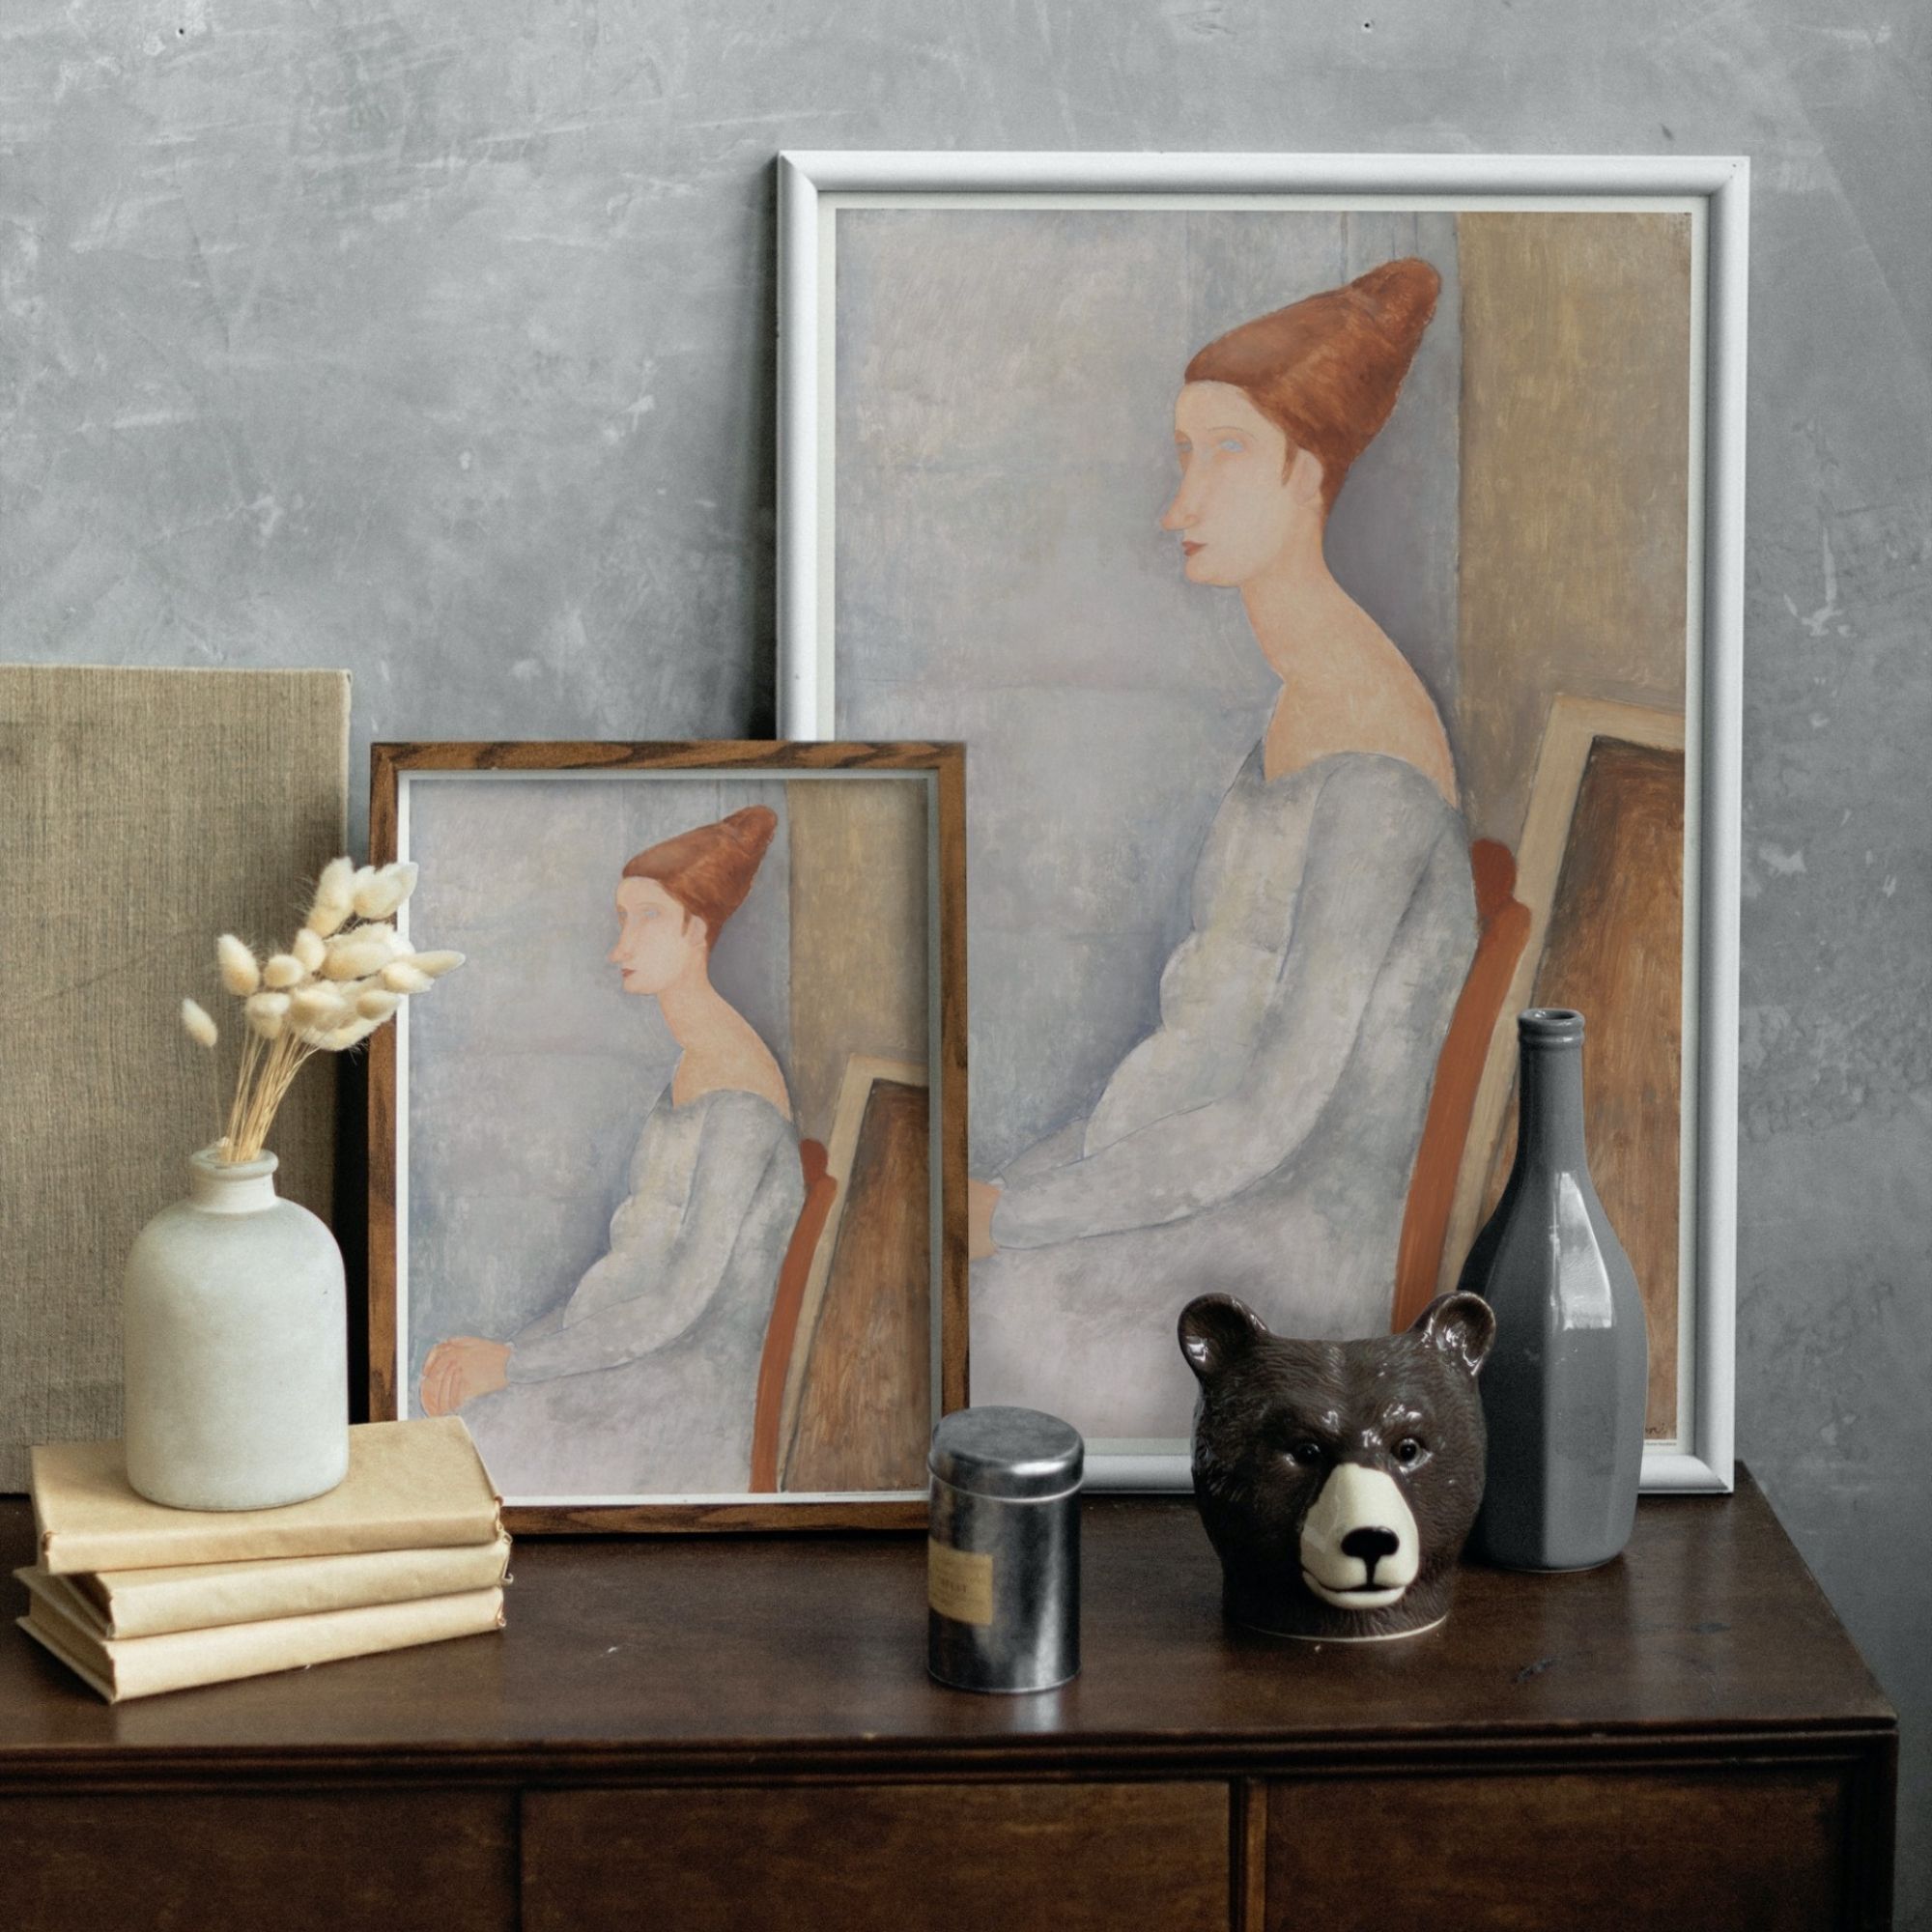 Painting by Amedeo Modigliani of Jeanne Hébuterne, depicted with a characteristic elongated neck and a contemplative gaze. Her figure is adorned in a softly draped garment, with auburn hair styled in an updo, set against a muted backdrop that emphasizes the subject's ethereal beauty and Modigliani's distinctive use of form and color.